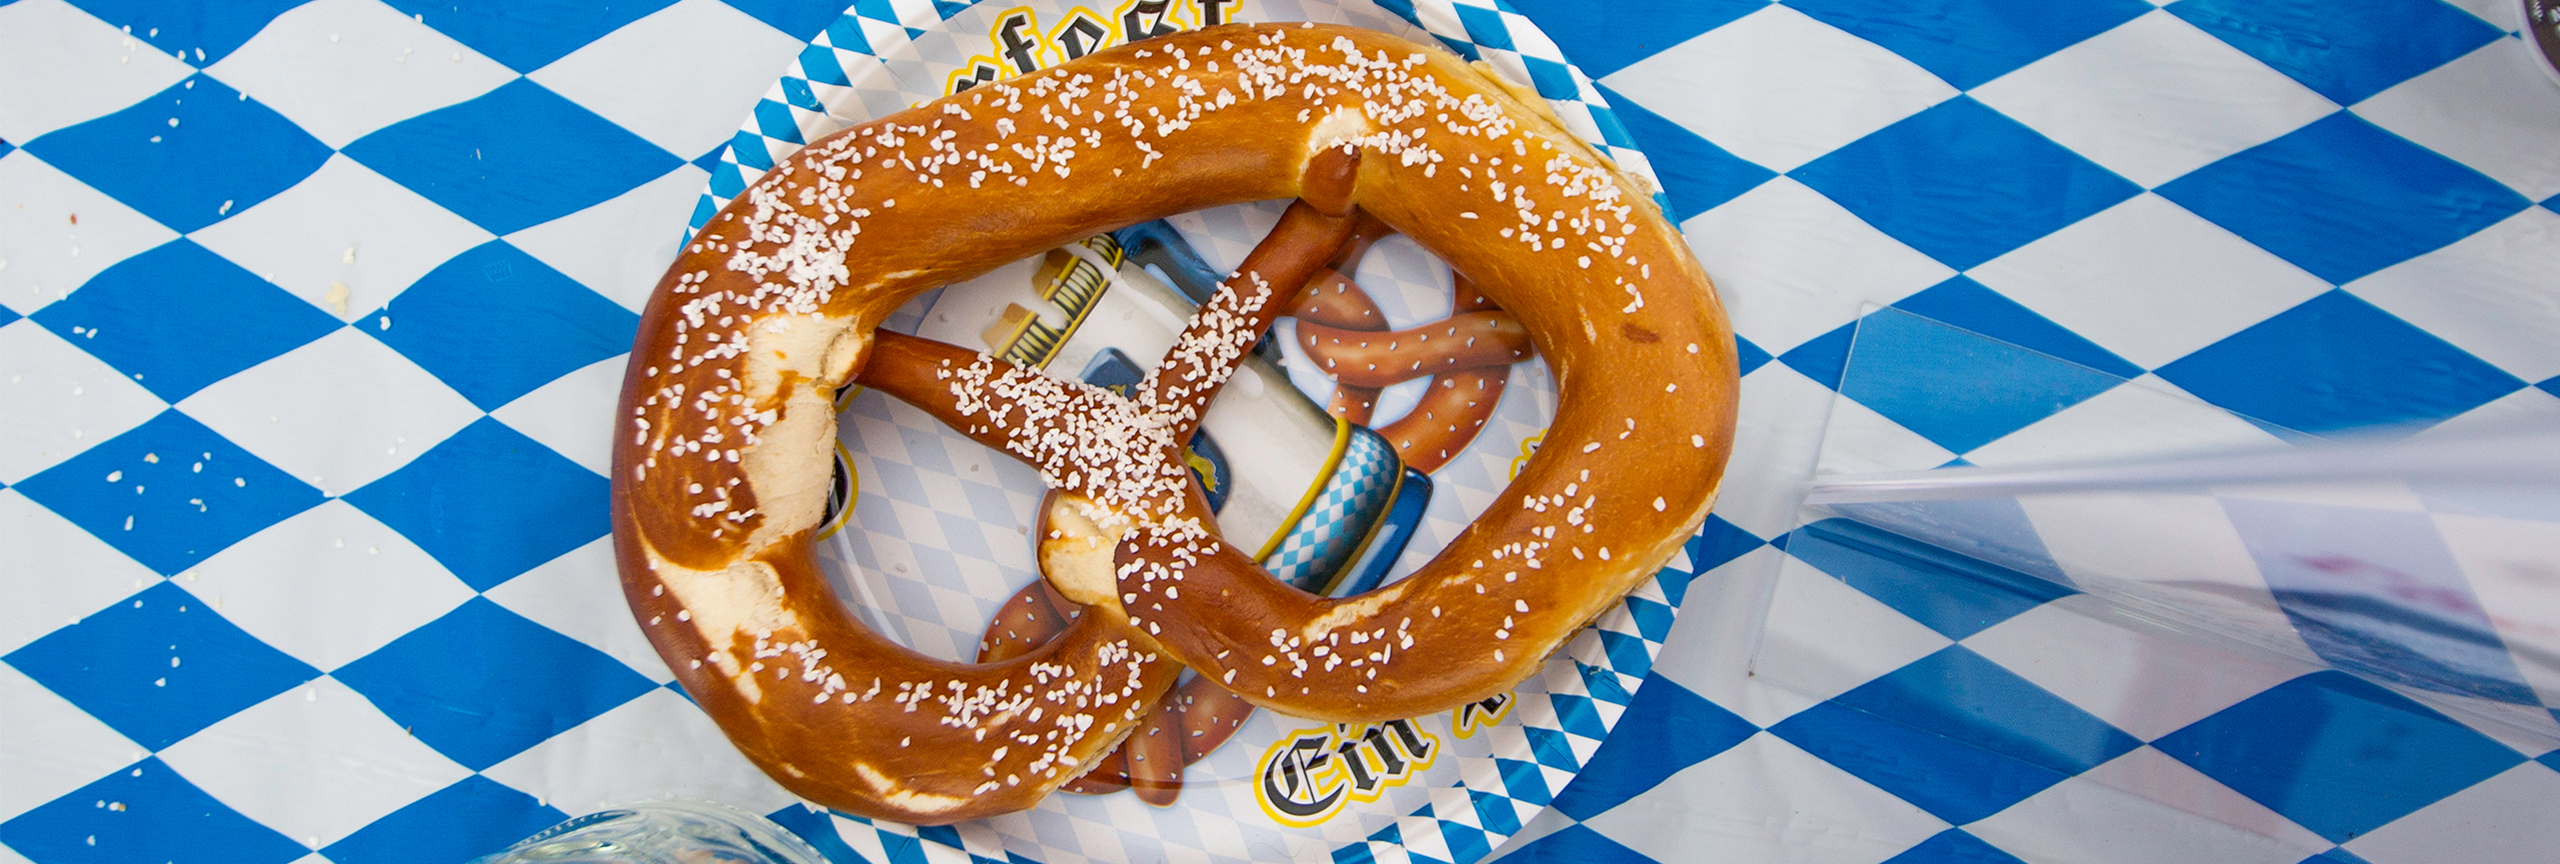 Closeup of pretzel on blue and white tablecloth.